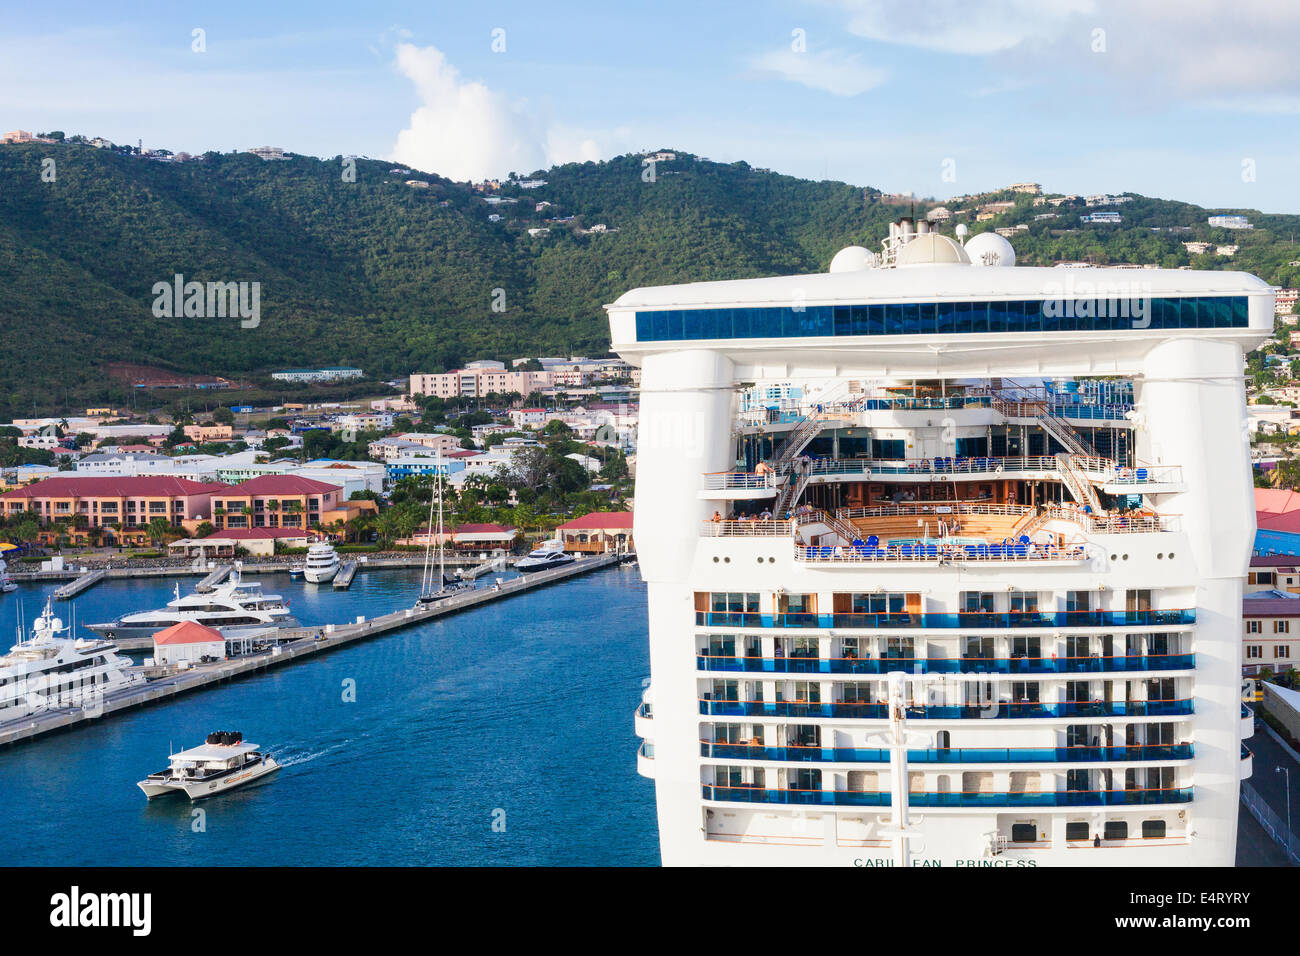 A cruise ship in port at Charlotte Amalie, St. Thomas, US Virgin Islands viewed from another cruise ship Stock Photo